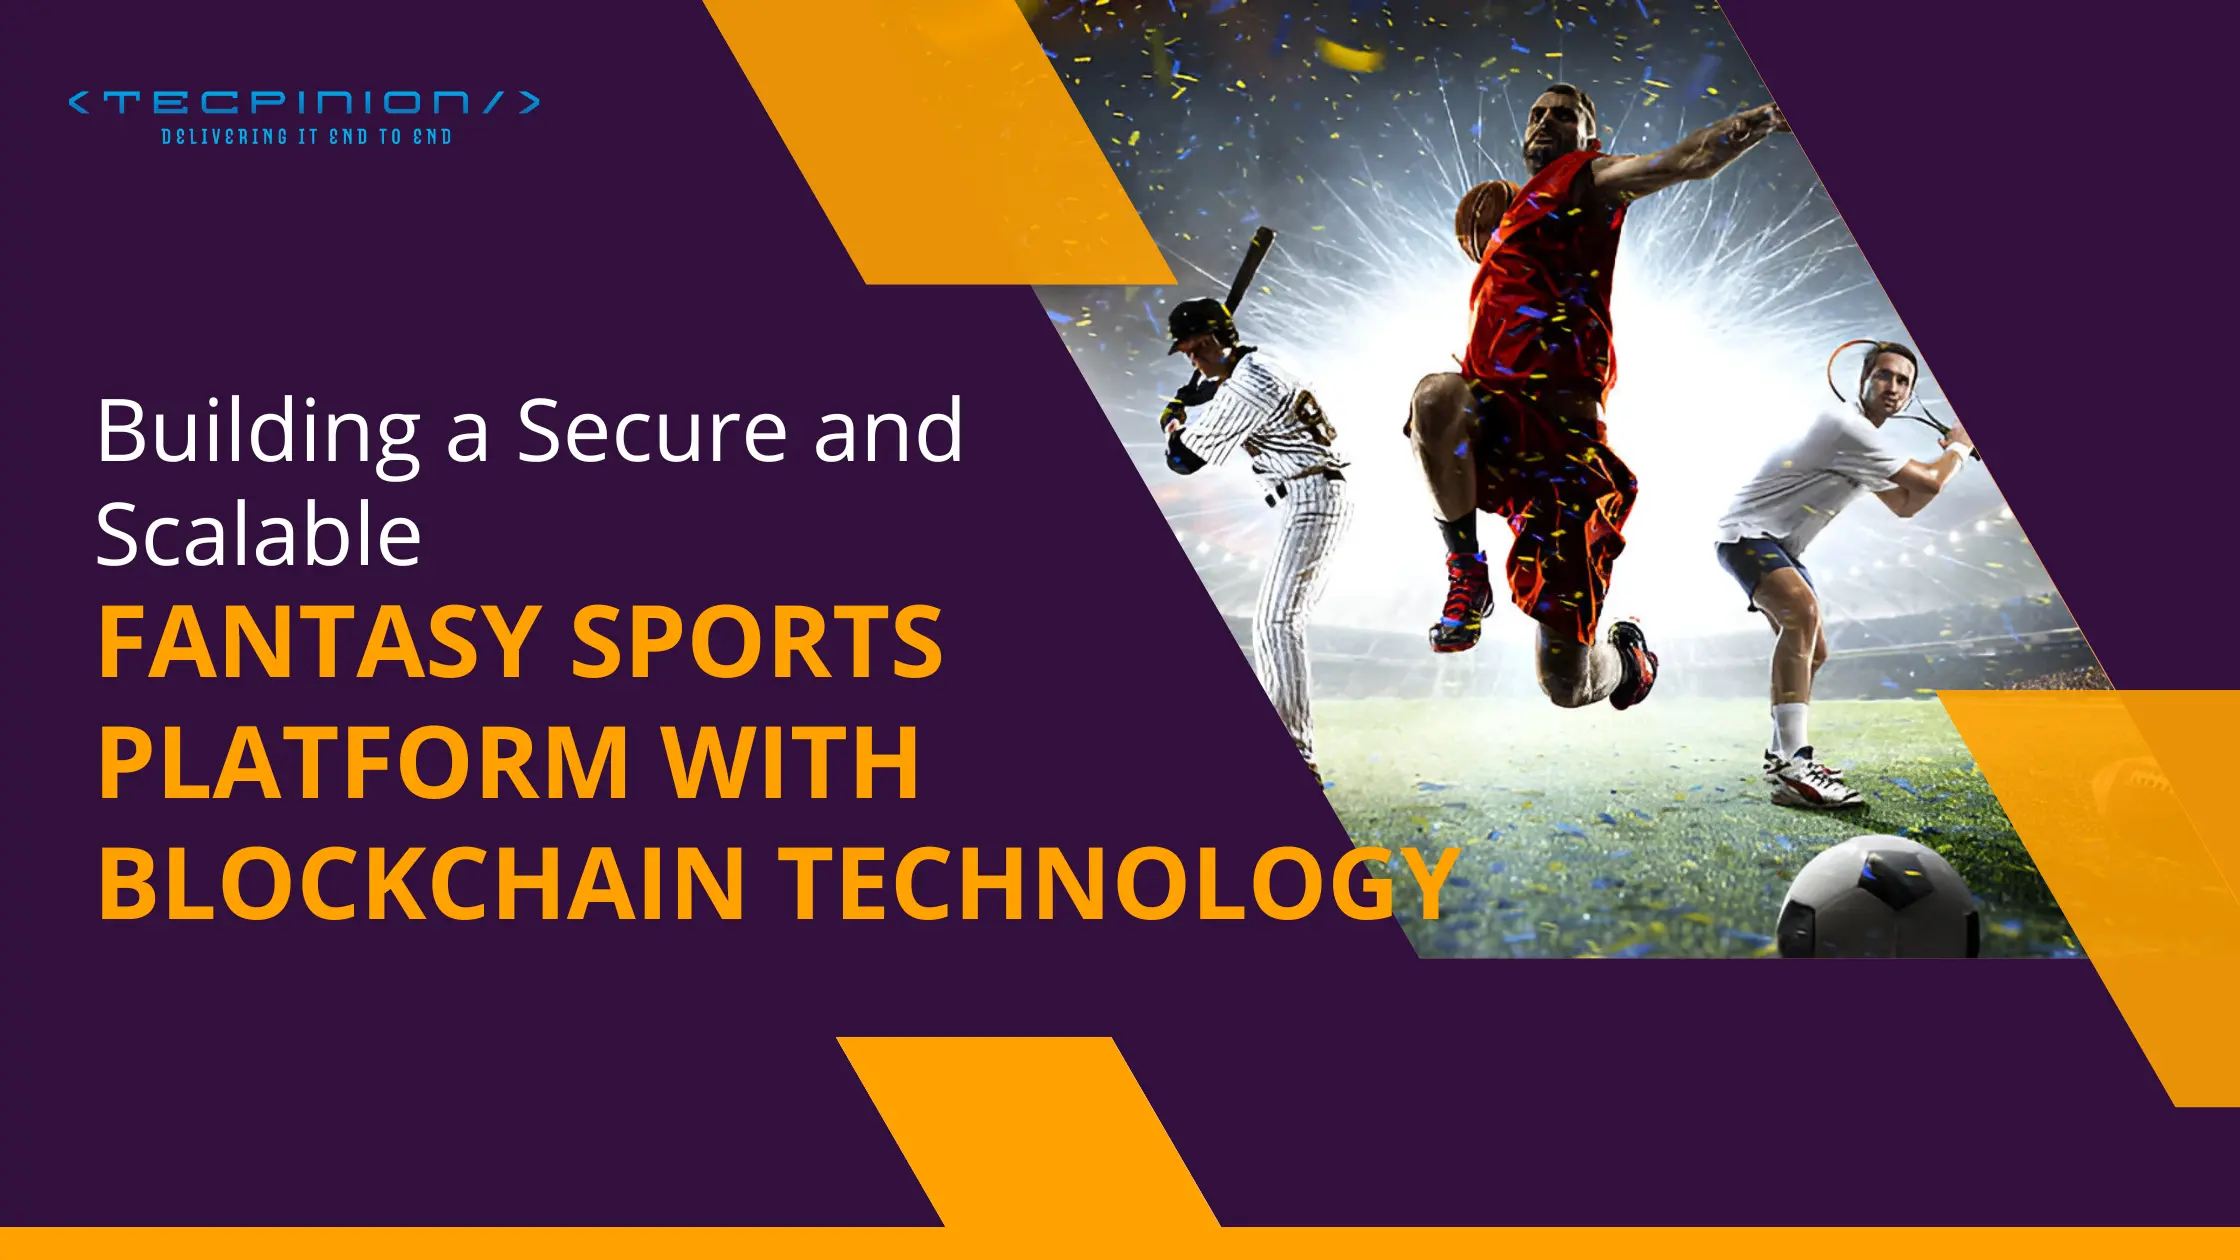 Building a Secure and Scalable Fantasy Sports Platform with Blockchain Technology